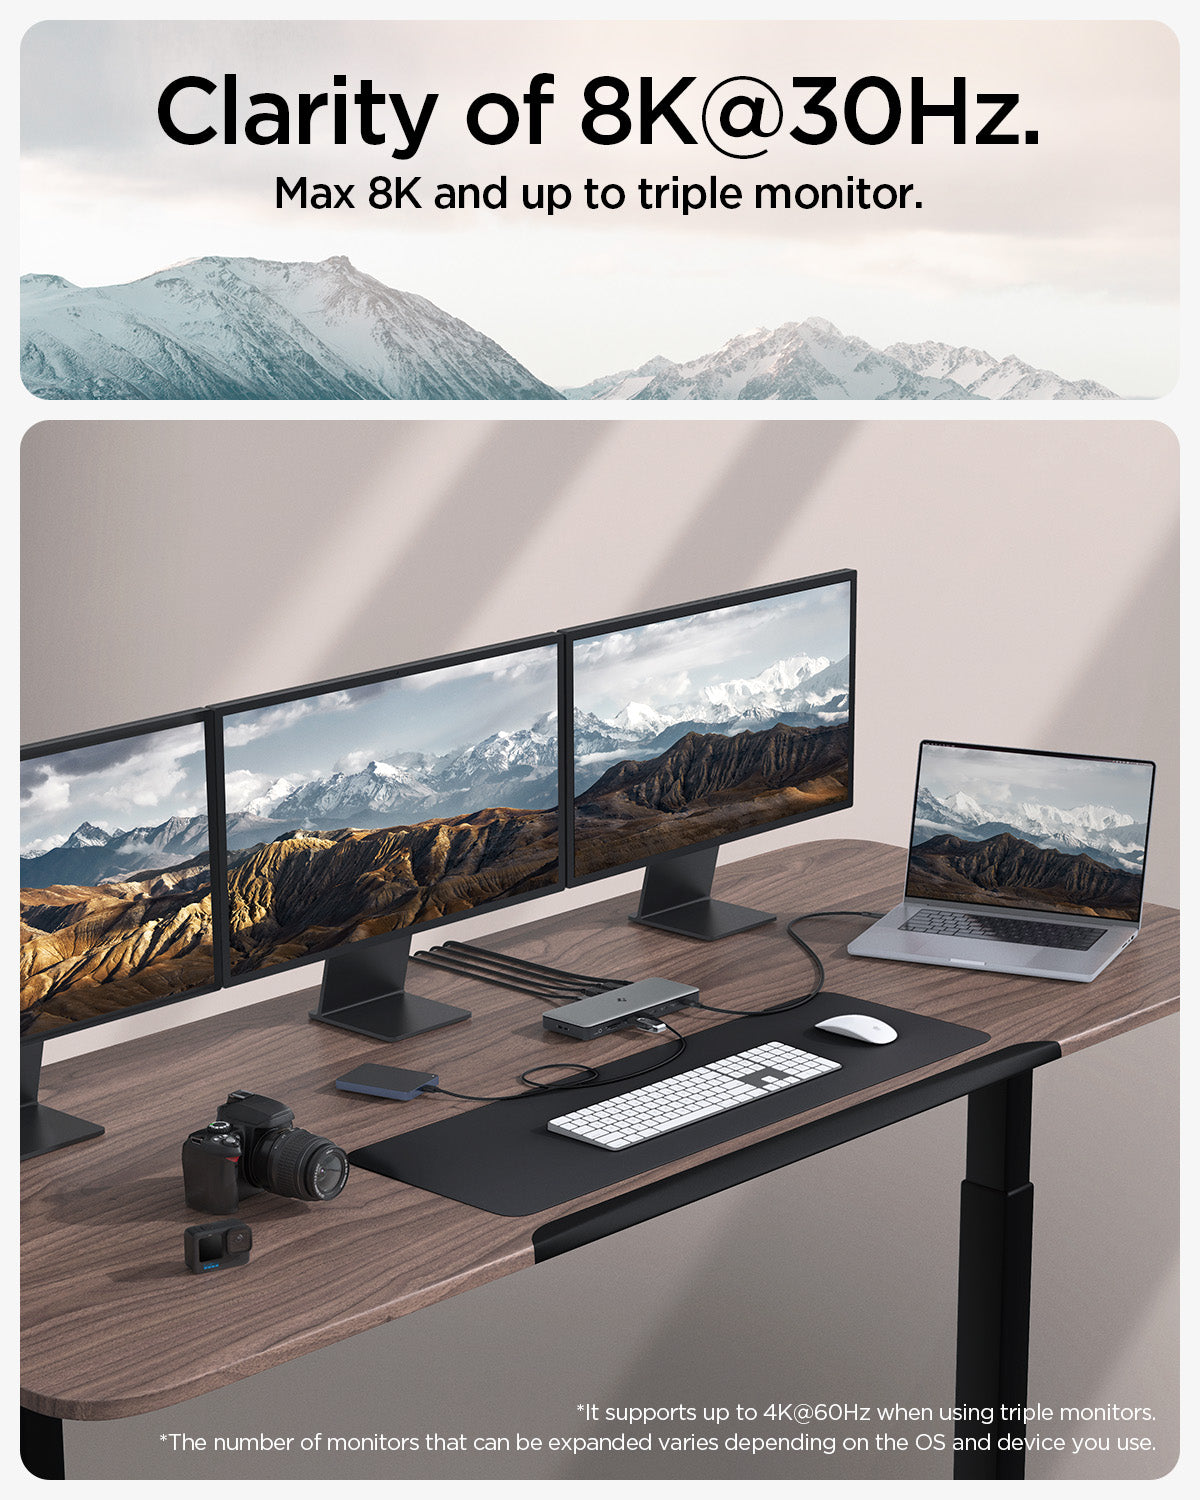 ACA06518 - ArcDock Pro Multi Hub PD2307 in Space Gray showing the Clarity of 8K@30Hz. Max 8K and up to triple monitor. It supports up to 4K@60Hz when using triple monitors. Then number of monitors that can be expanded varies depending on the OS and device you use